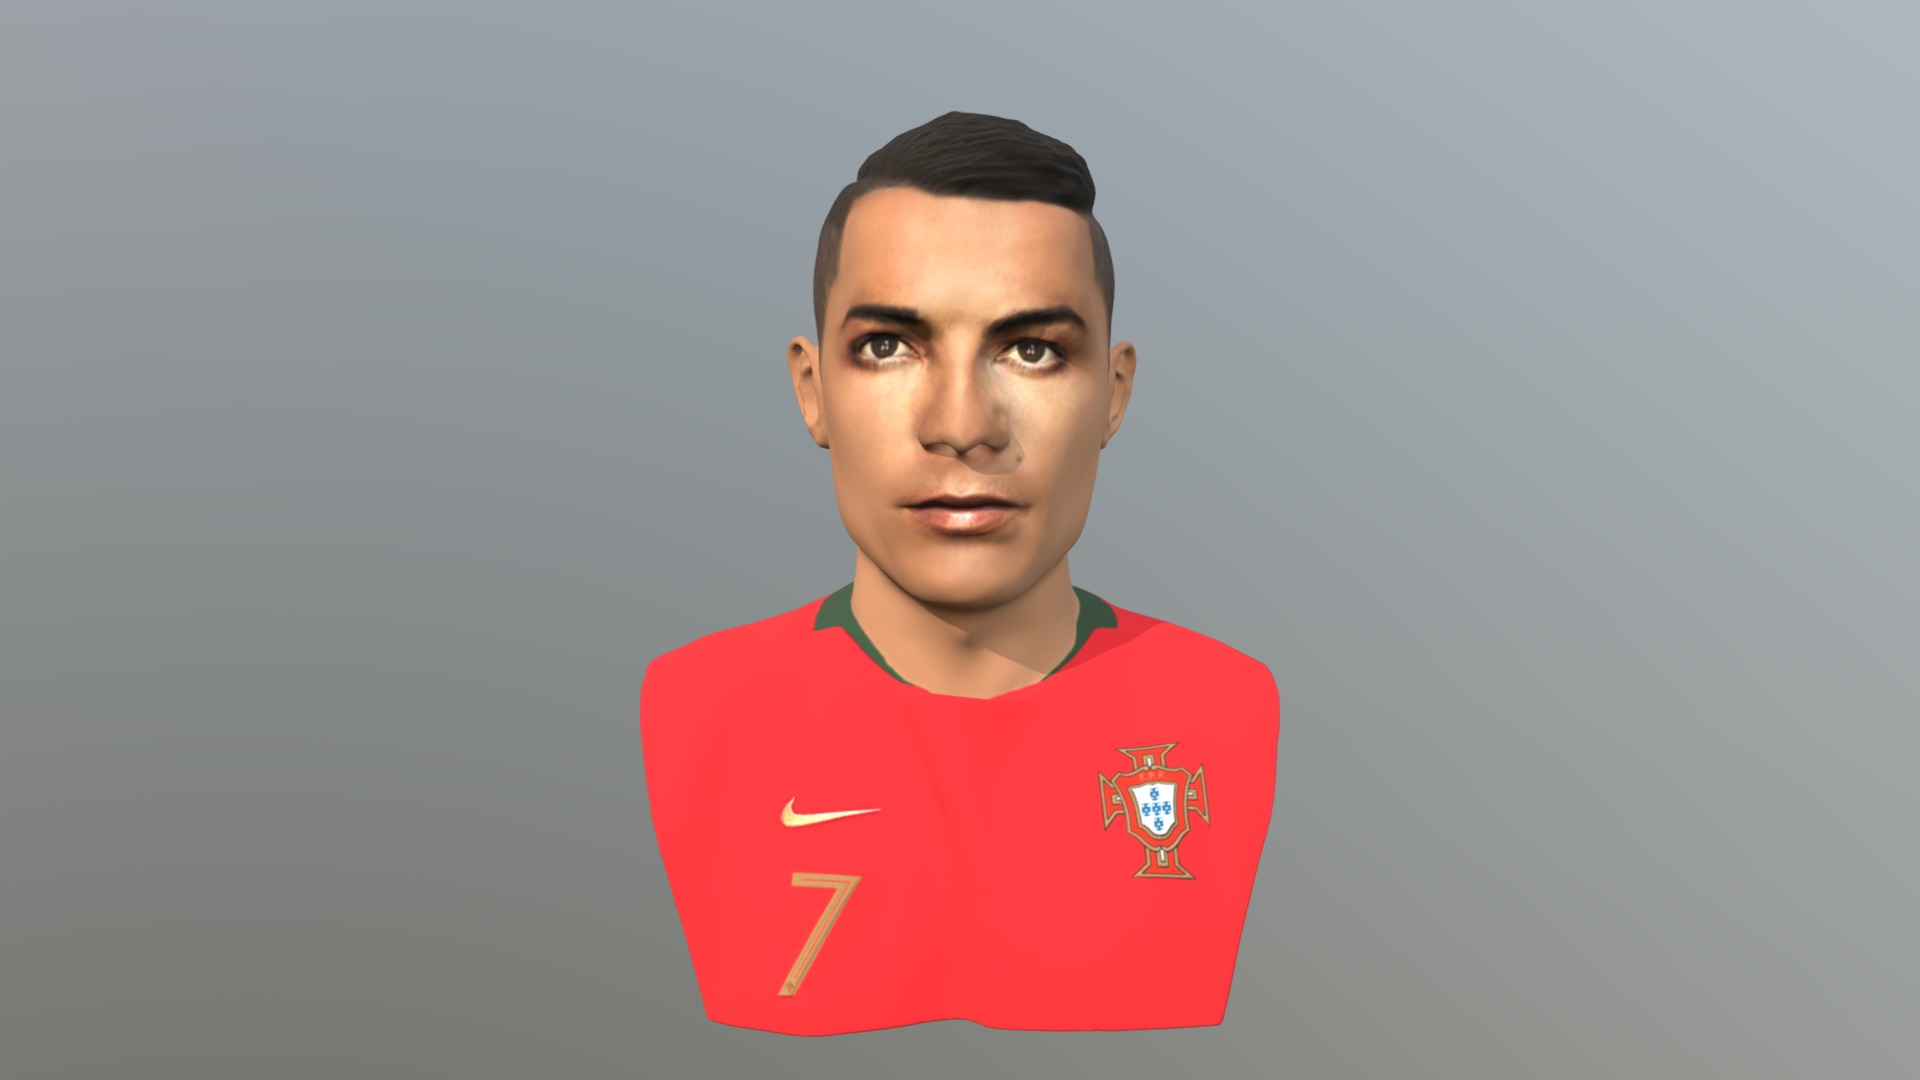 3D model Cristiano Ronaldo bust full color 3D printing - This is a 3D model of the Cristiano Ronaldo bust full color 3D printing. The 3D model is about a man wearing a red shirt.